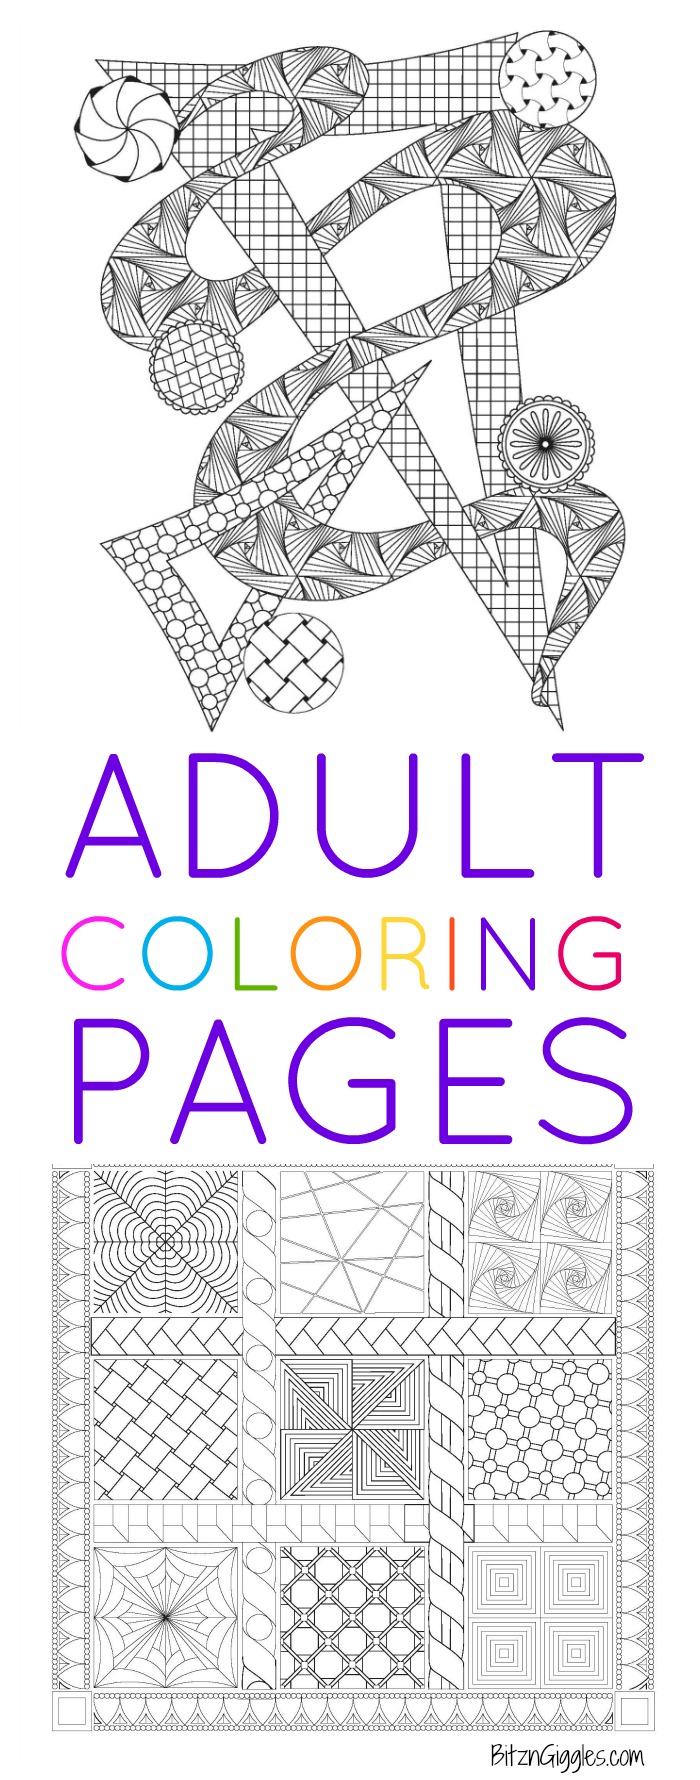 Printable Adult Coloring Pages - Bitz & Giggles